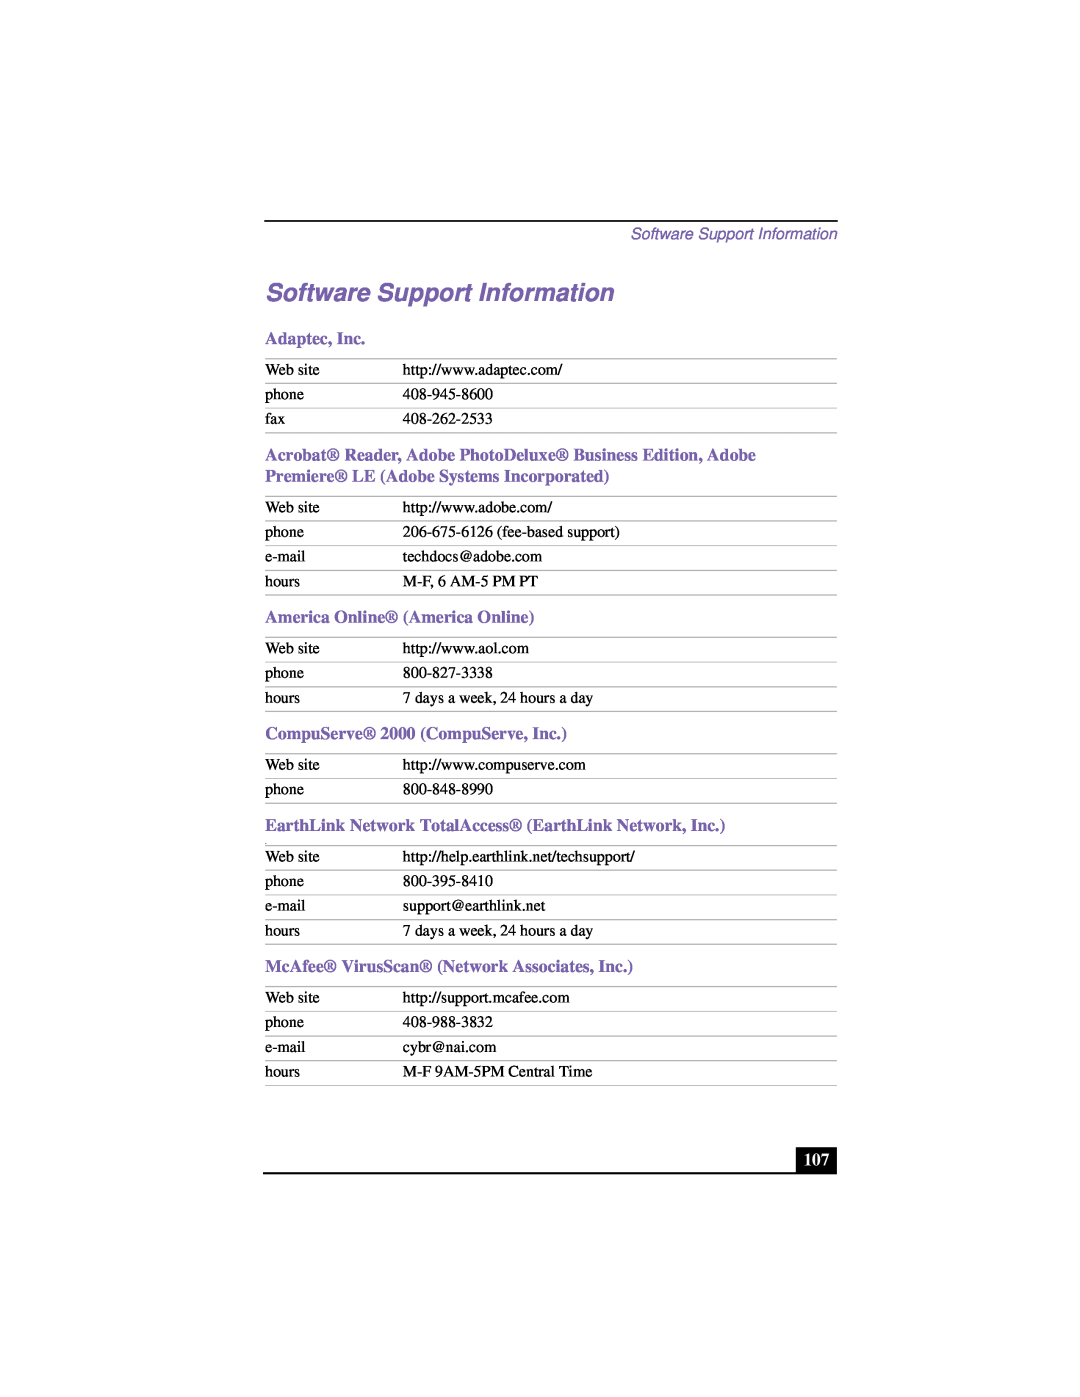 Sony PCG-FX170K Software Support Information, Adaptec, Inc, Acrobat Reader, Adobe PhotoDeluxe Business Edition, Adobe 